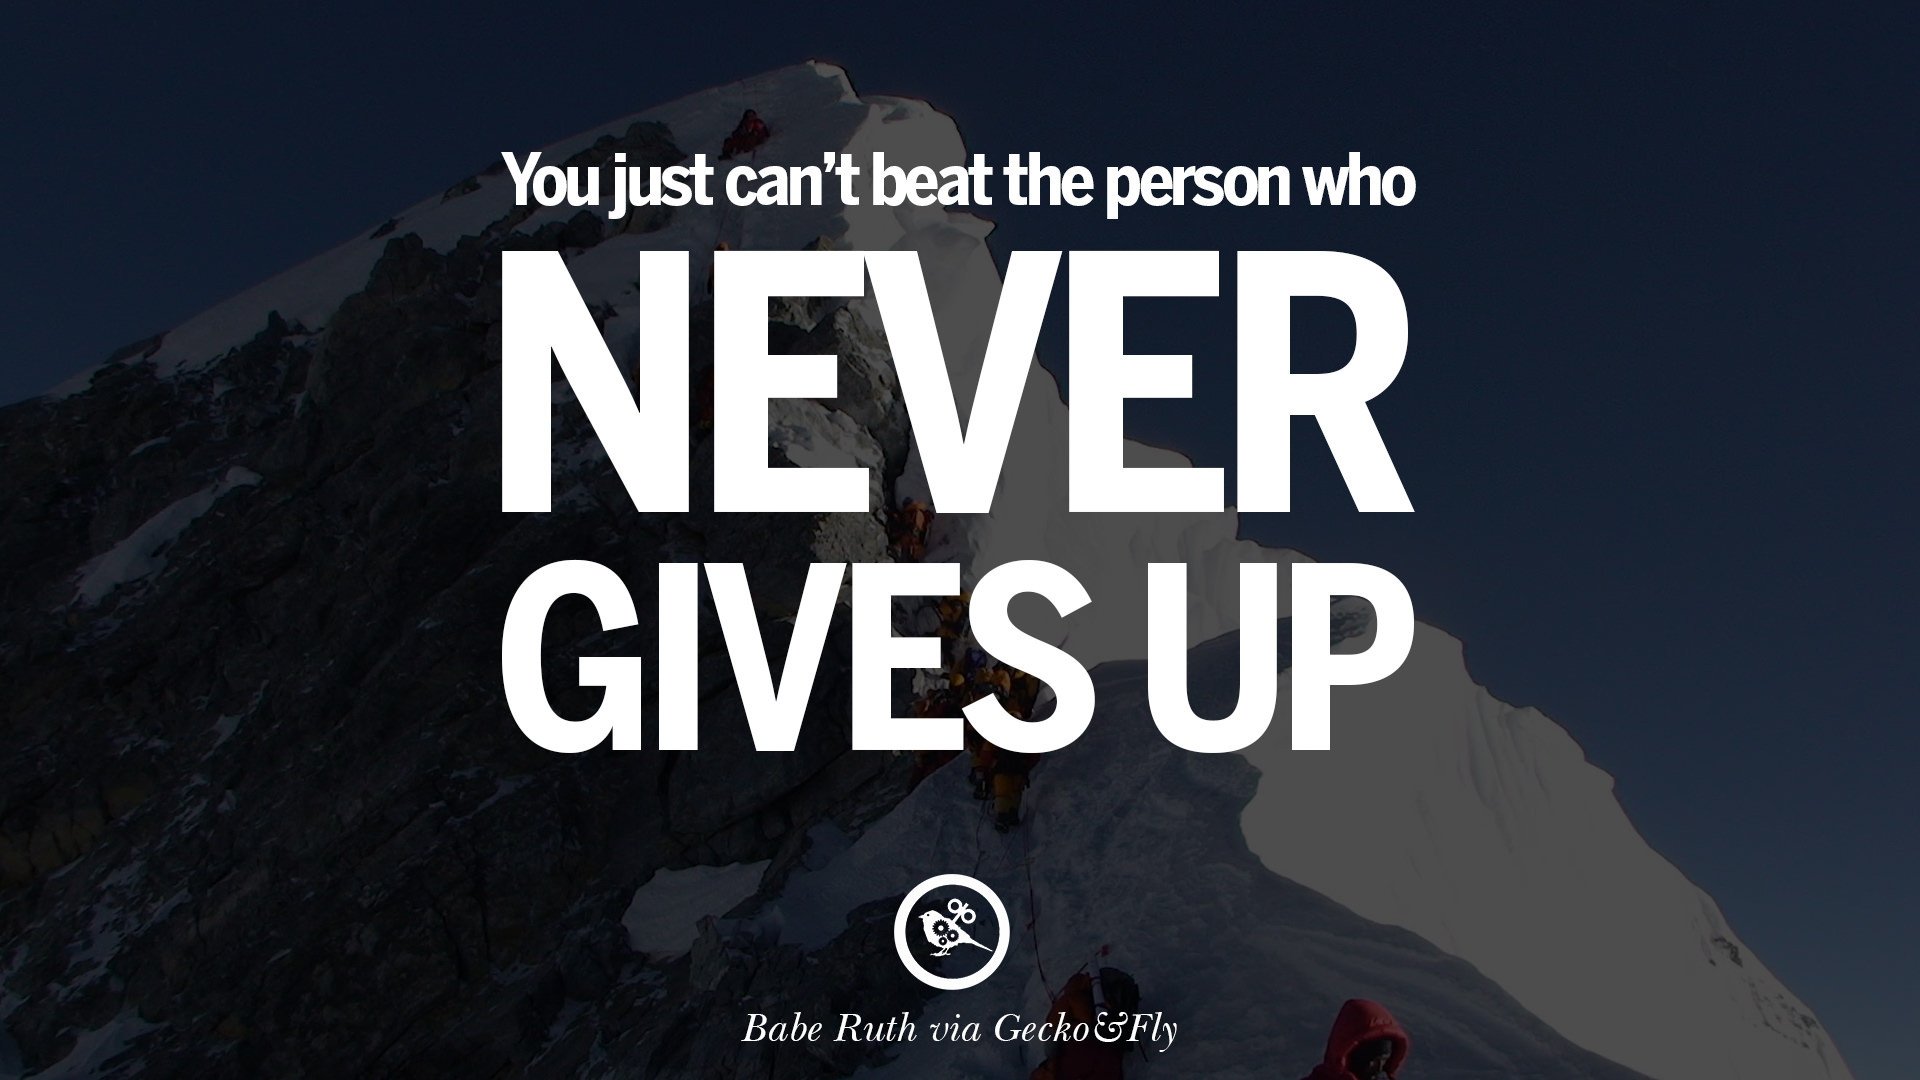 Sports Quotes Motivational
 20 Encouraging and Motivational Poster Quotes on Sports